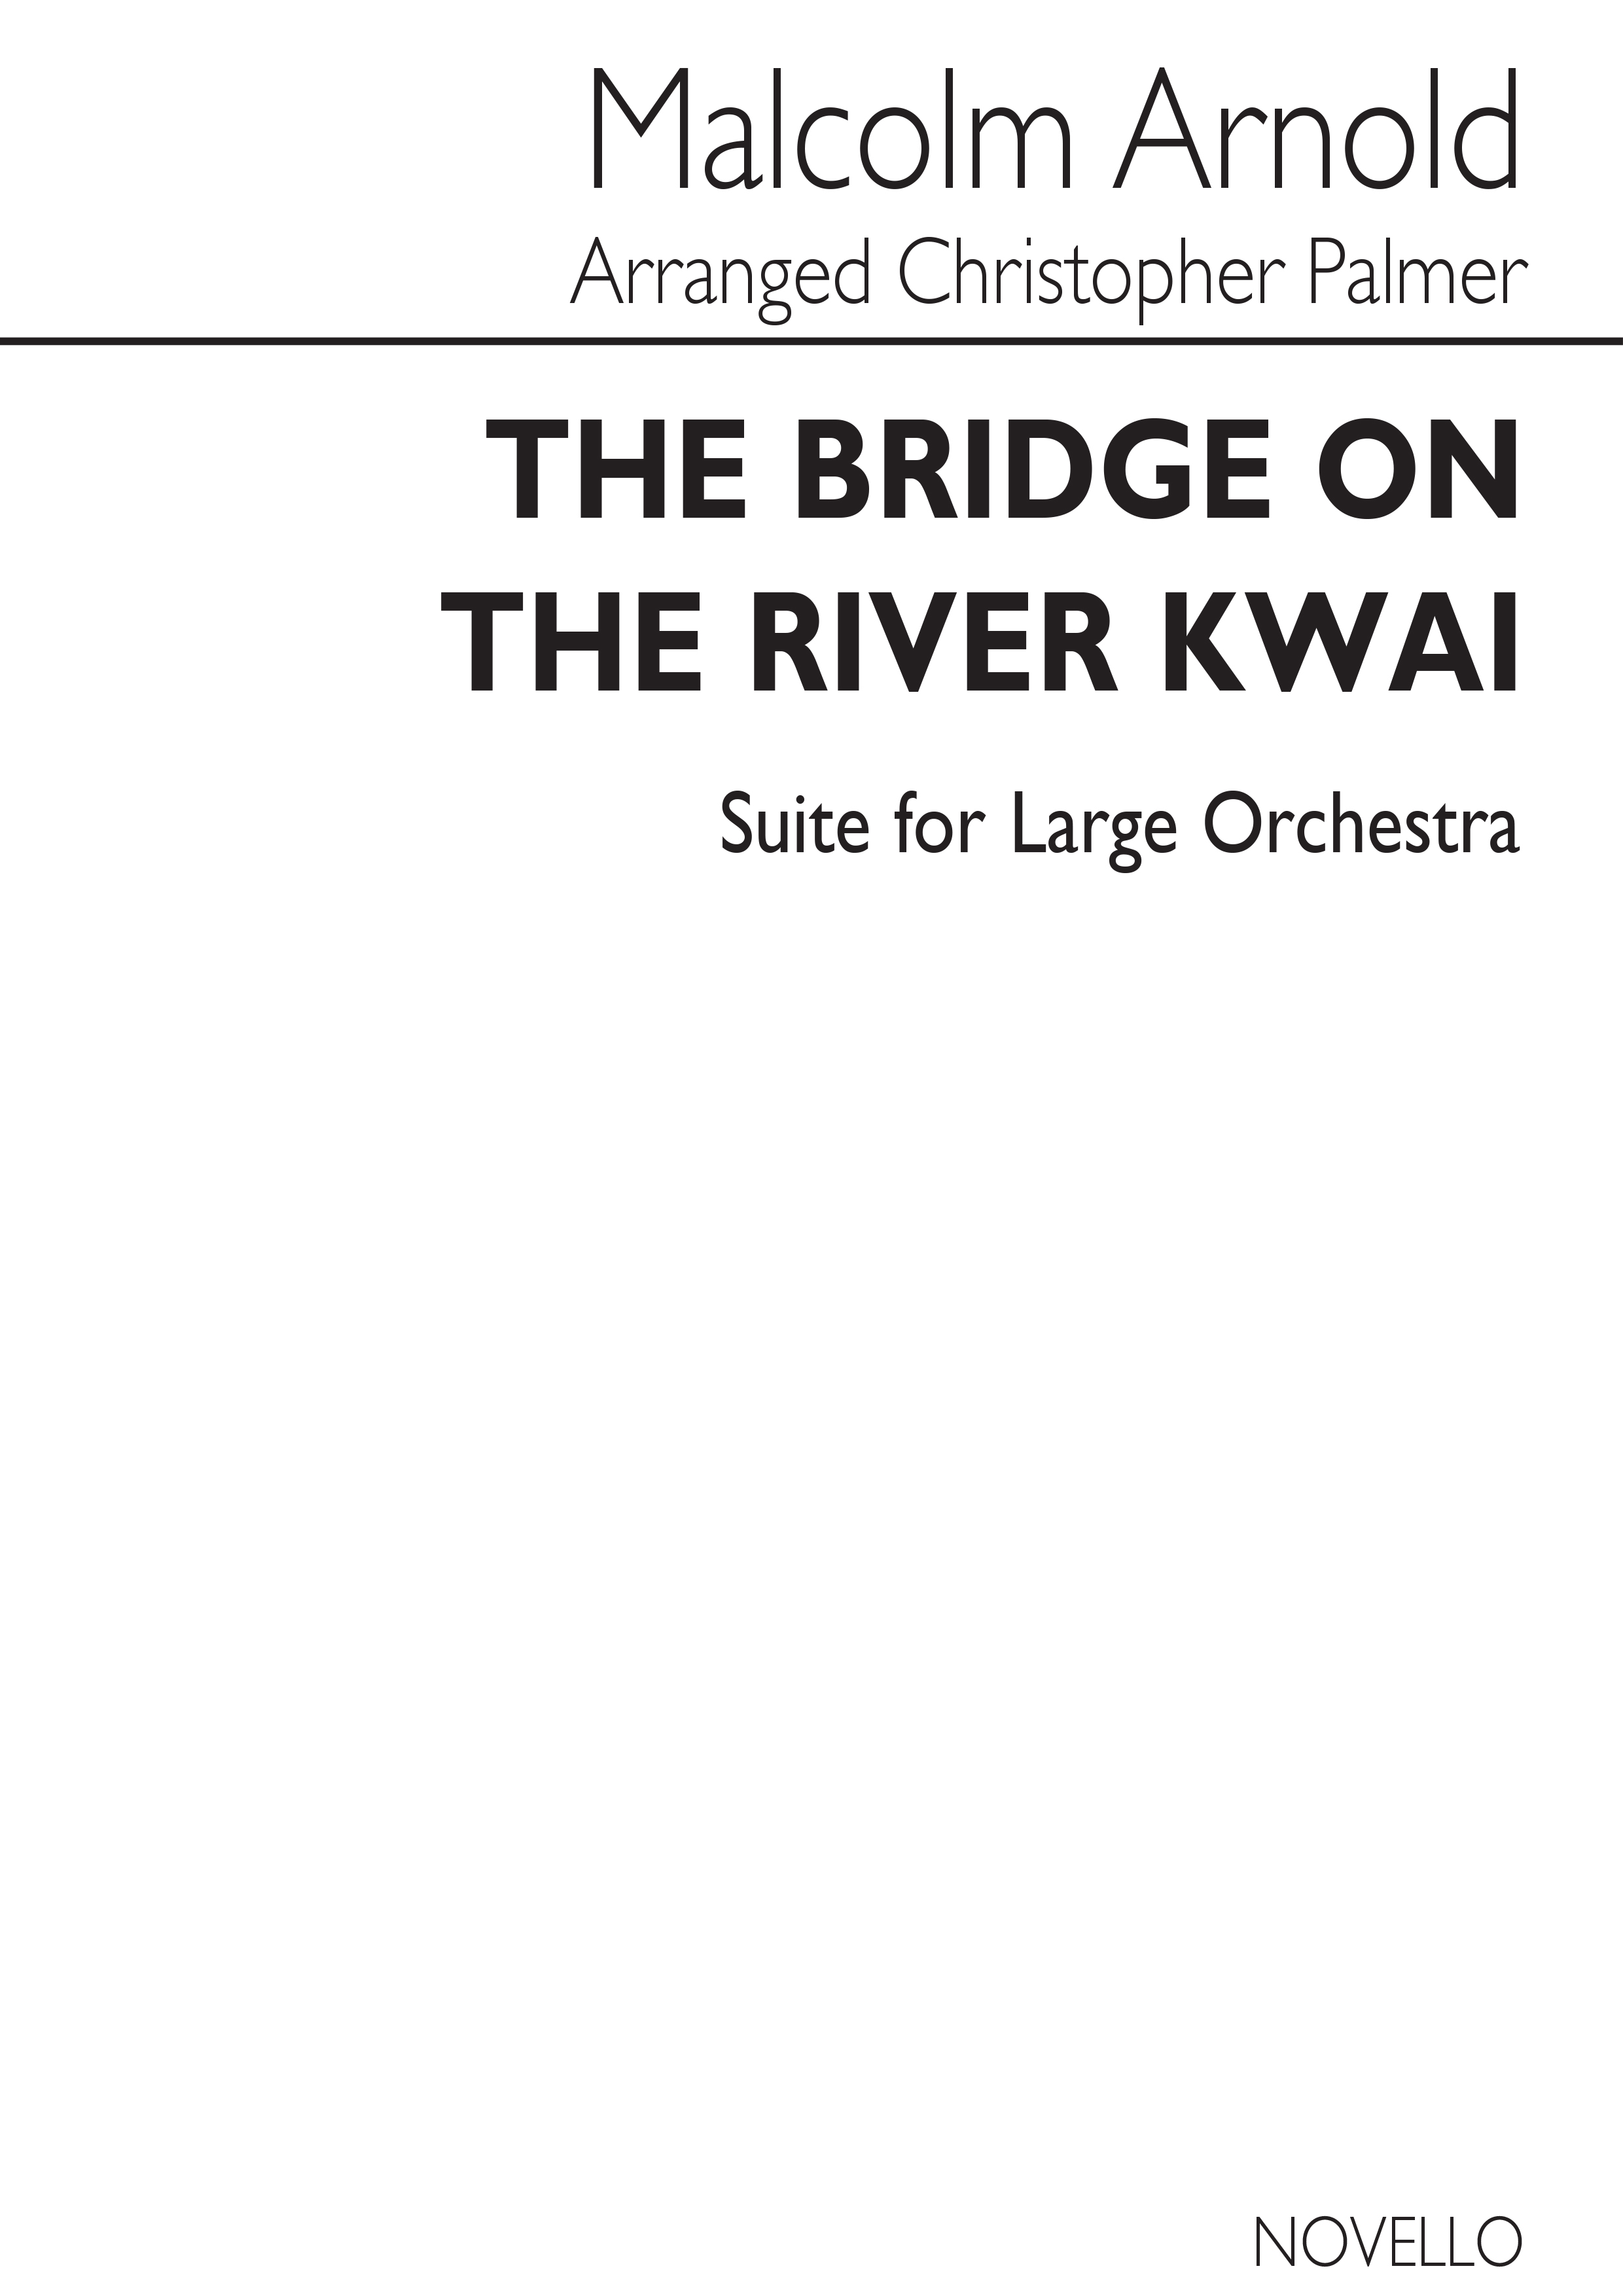 Malcolm Arnold: The Bridge On The River Kwai- Concert Suite: Orchestra: Score